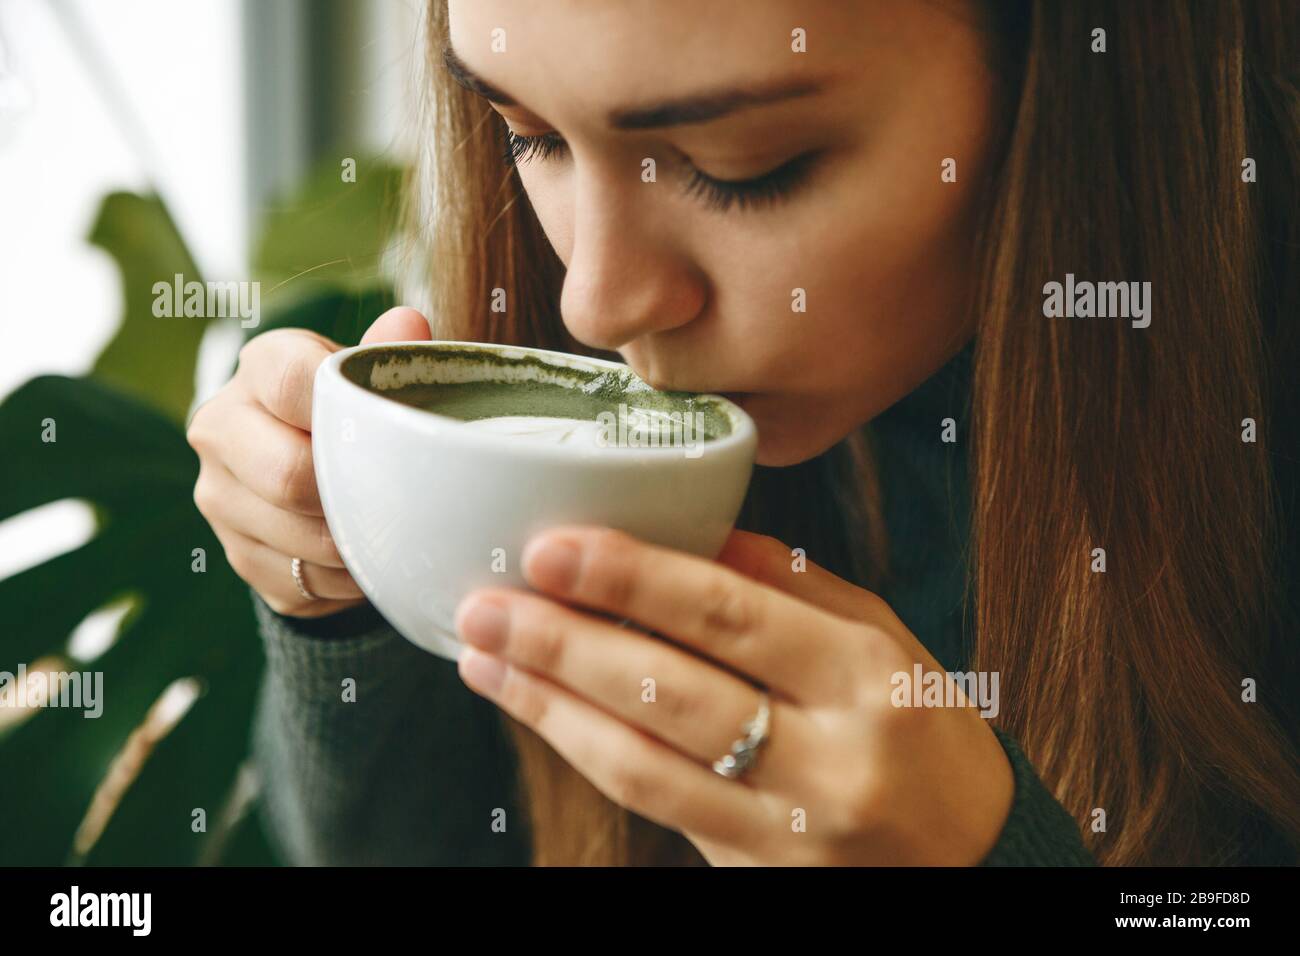 Close-up face or portrait of a girl who drinks healthy and delicious green matcha latte tea Stock Photo